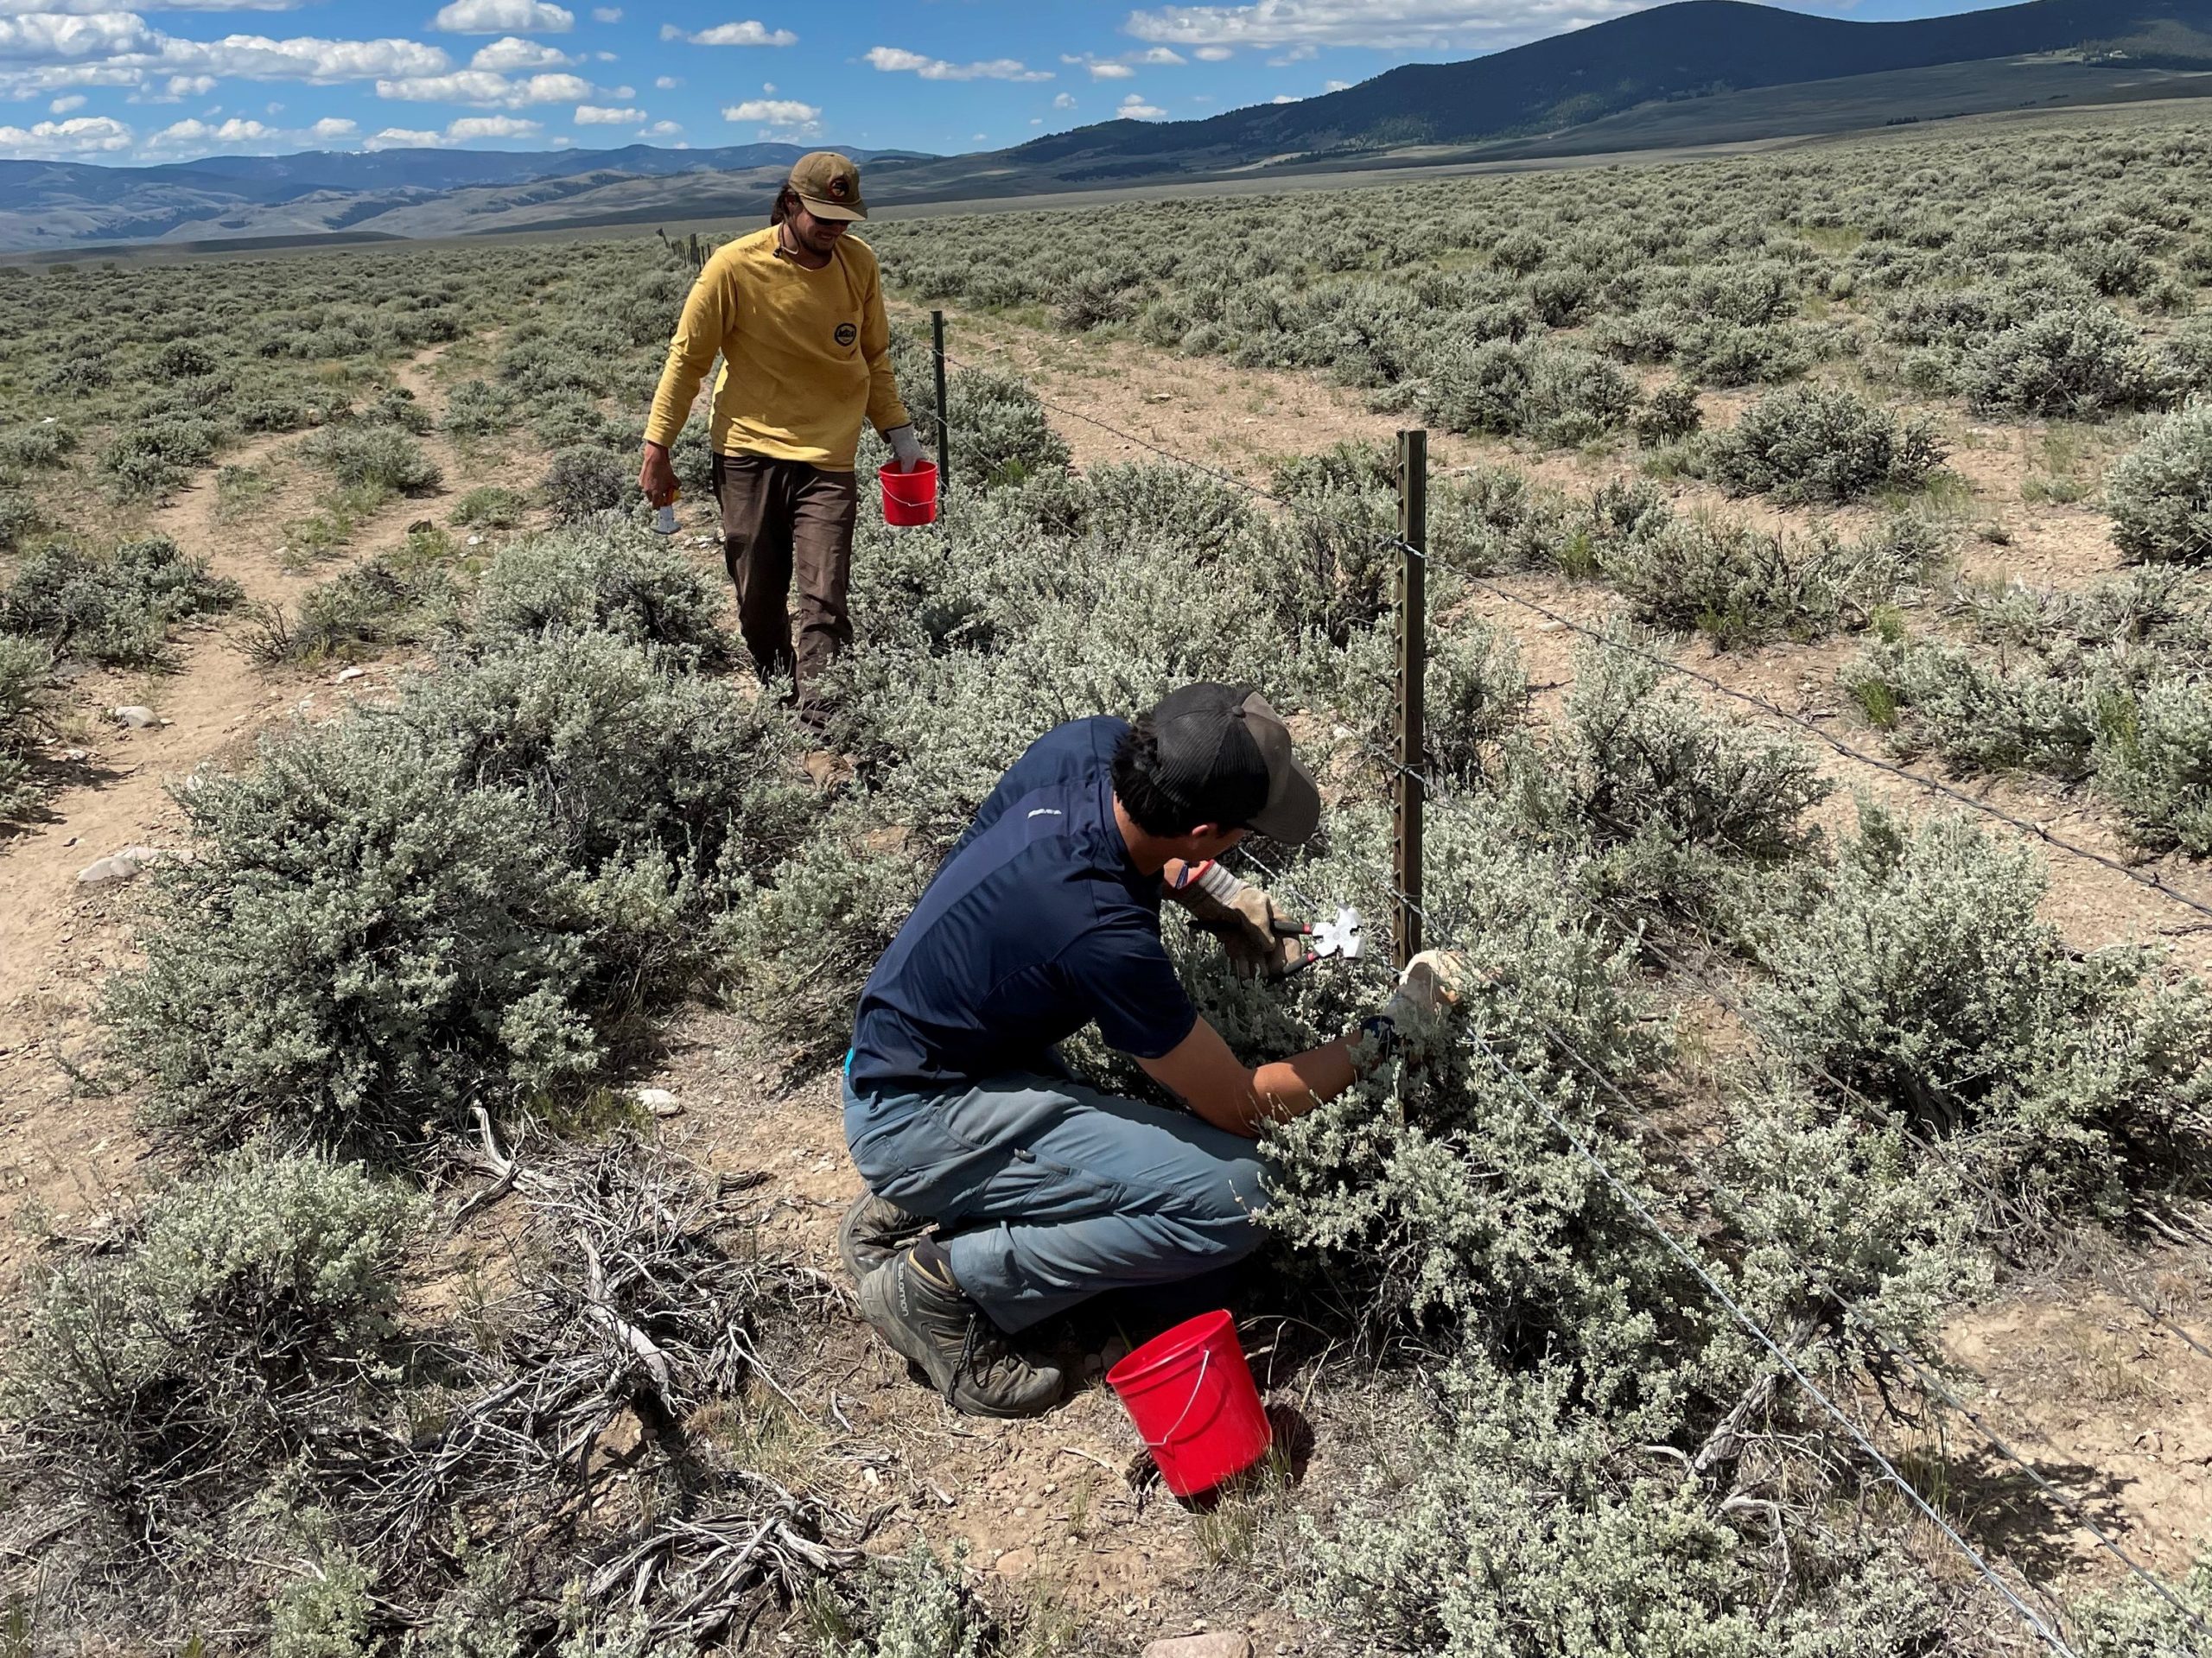 Volunteers replace the bottom strand of barbed wire with smooth wire at 18” above the ground to allow for wildlife passage under the fence.